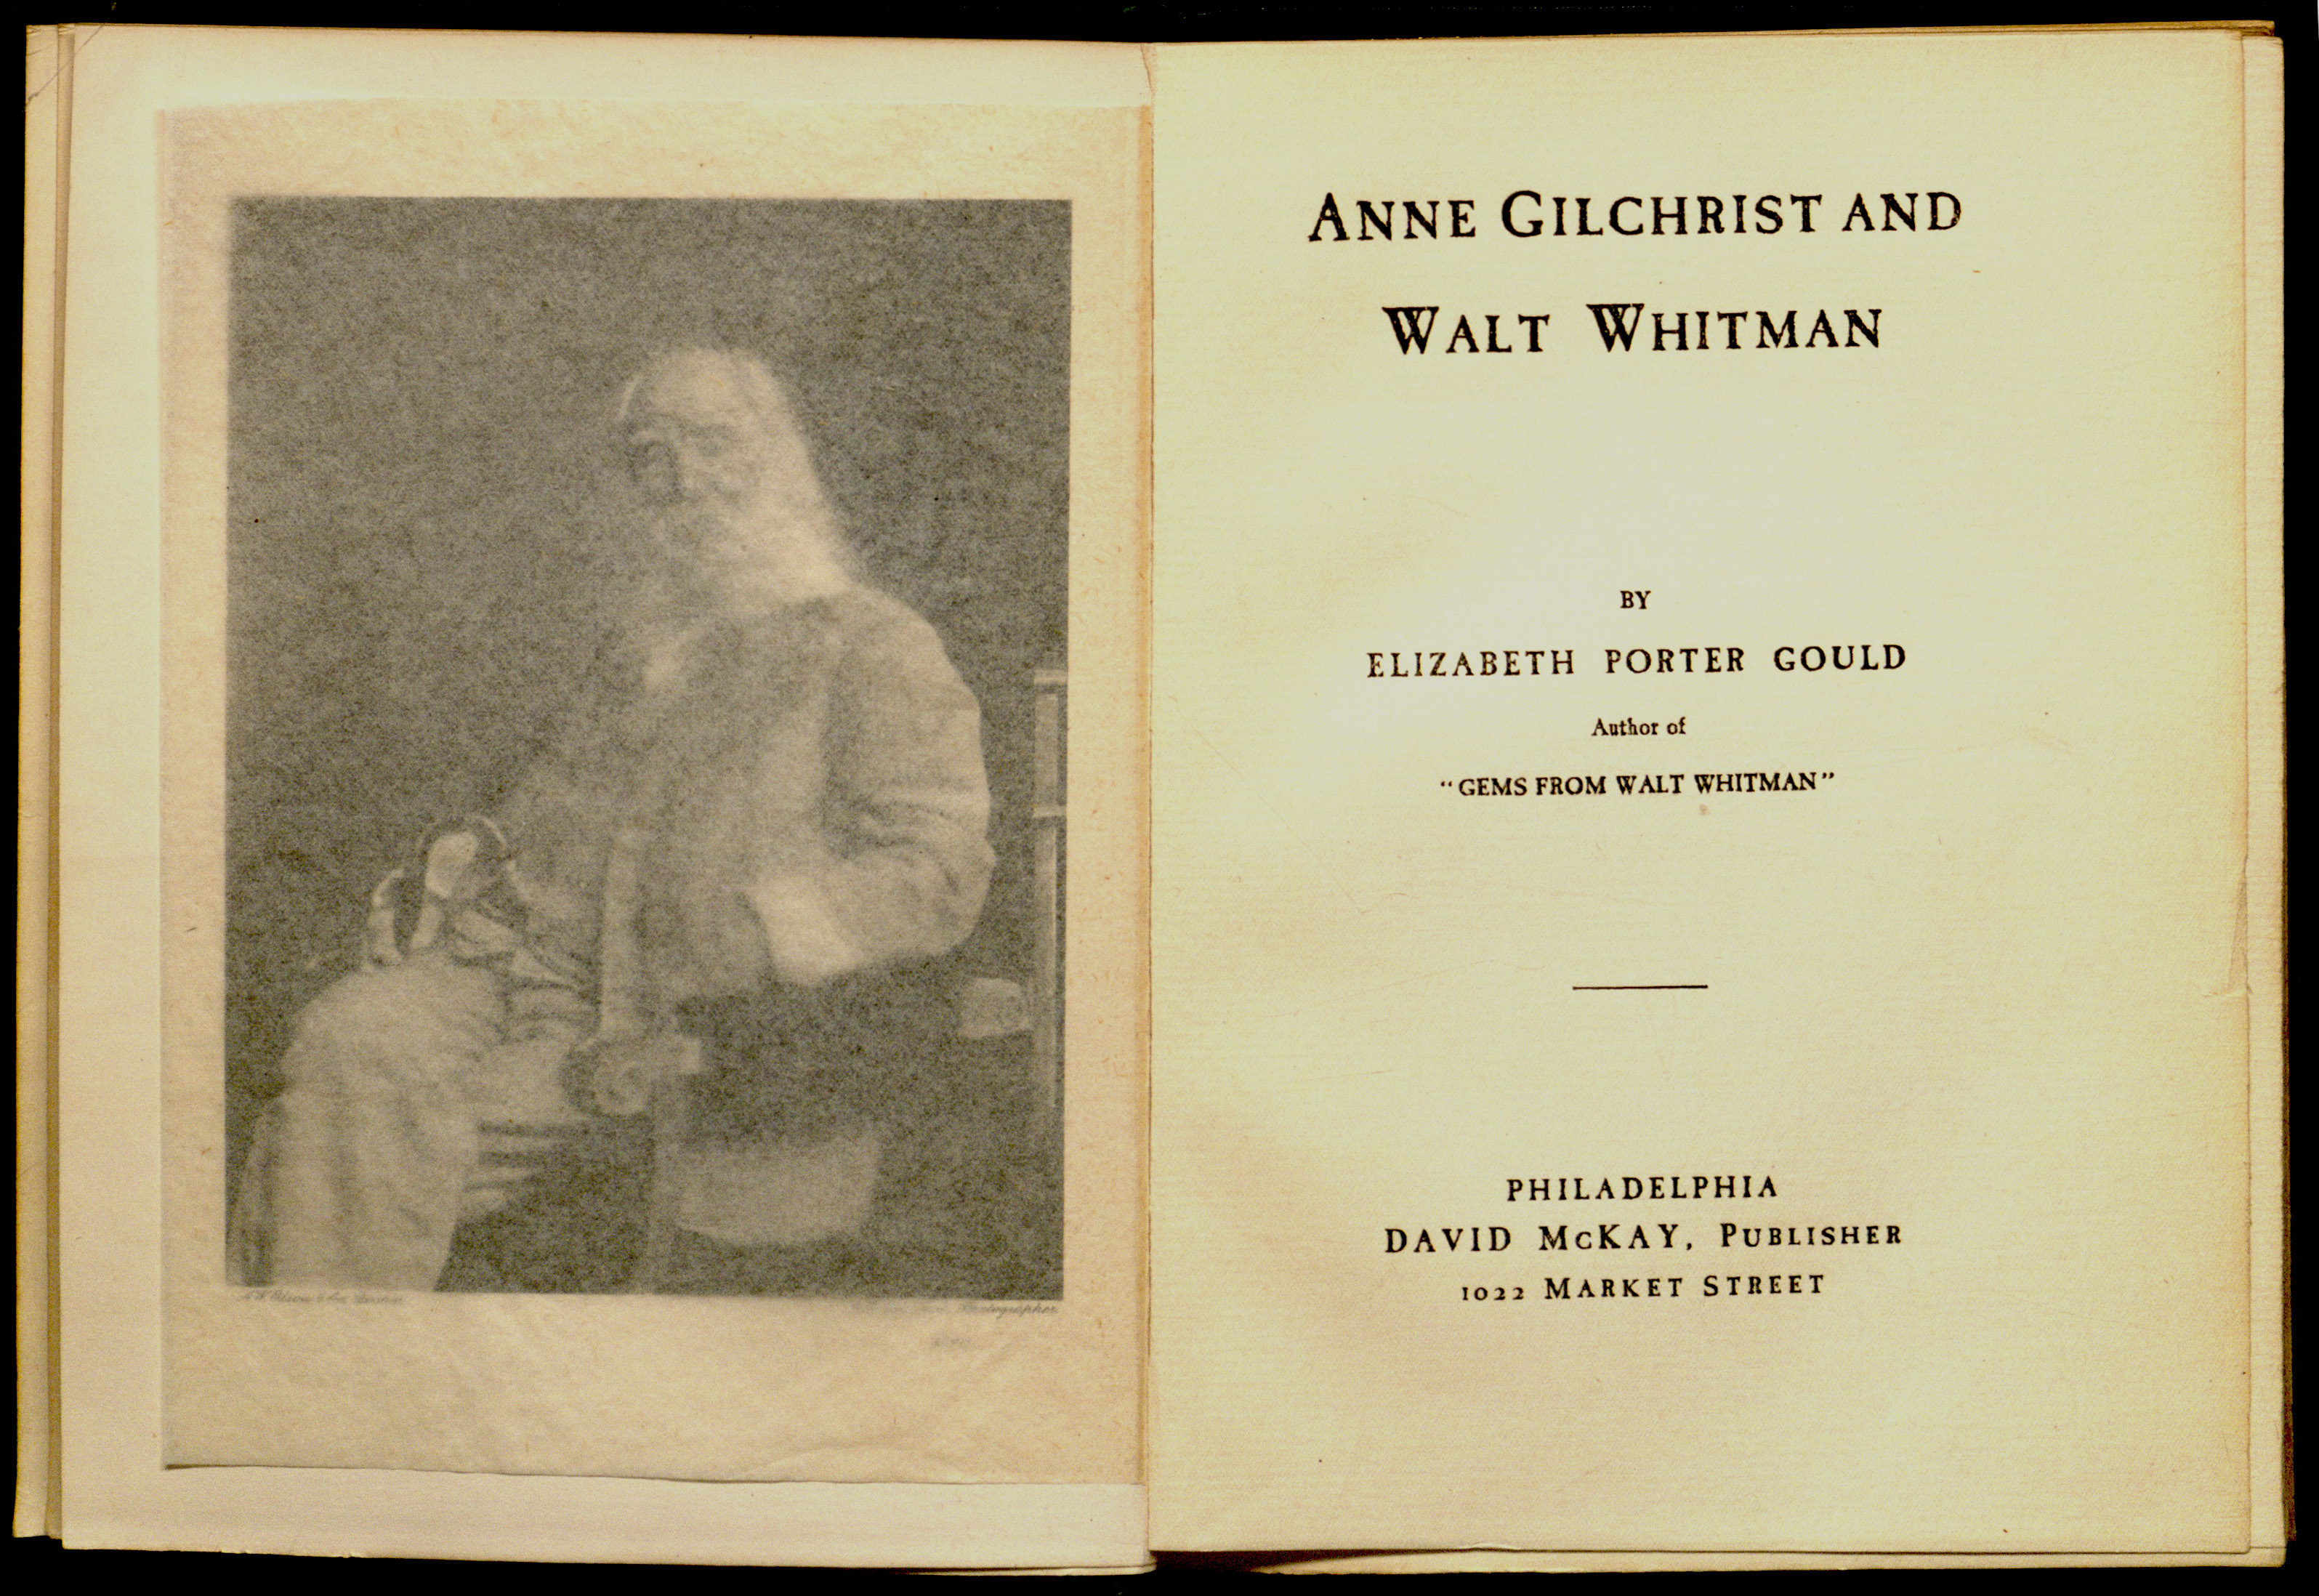 Anne Gilchrist and Walt Whitman by Elizabeth Porter Gould, title page